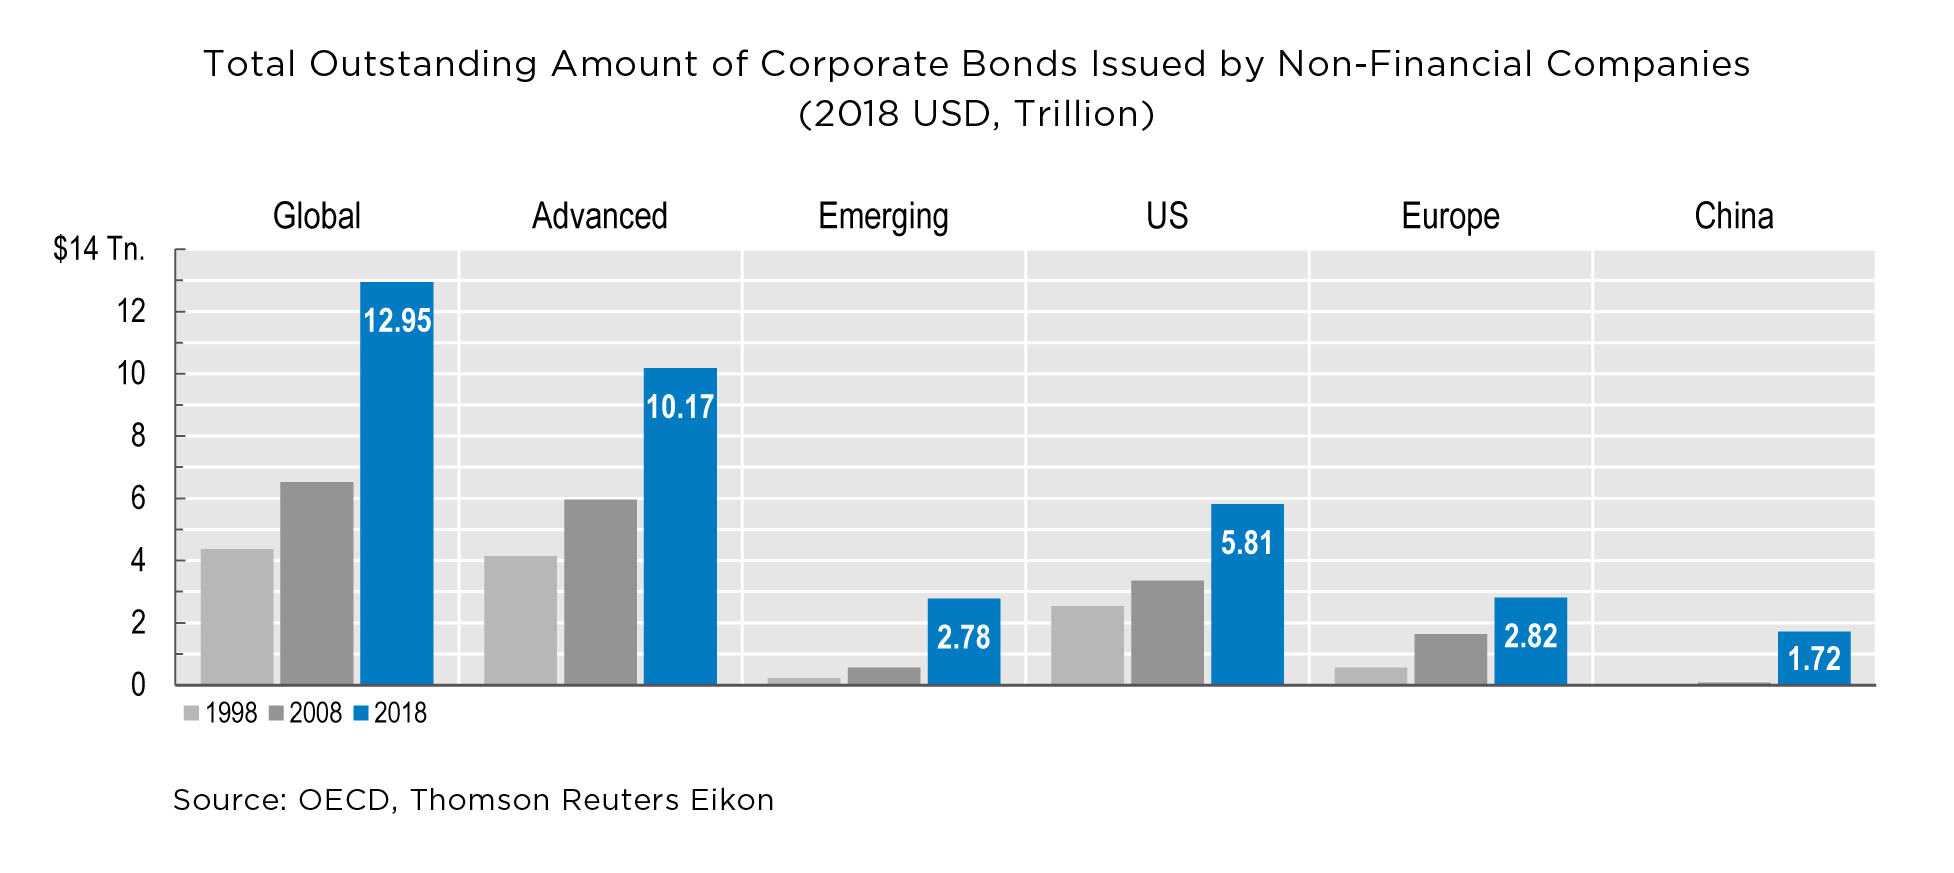 Total Outstanding Amount of Corporate Bonds Issued by Non-Financial Companies